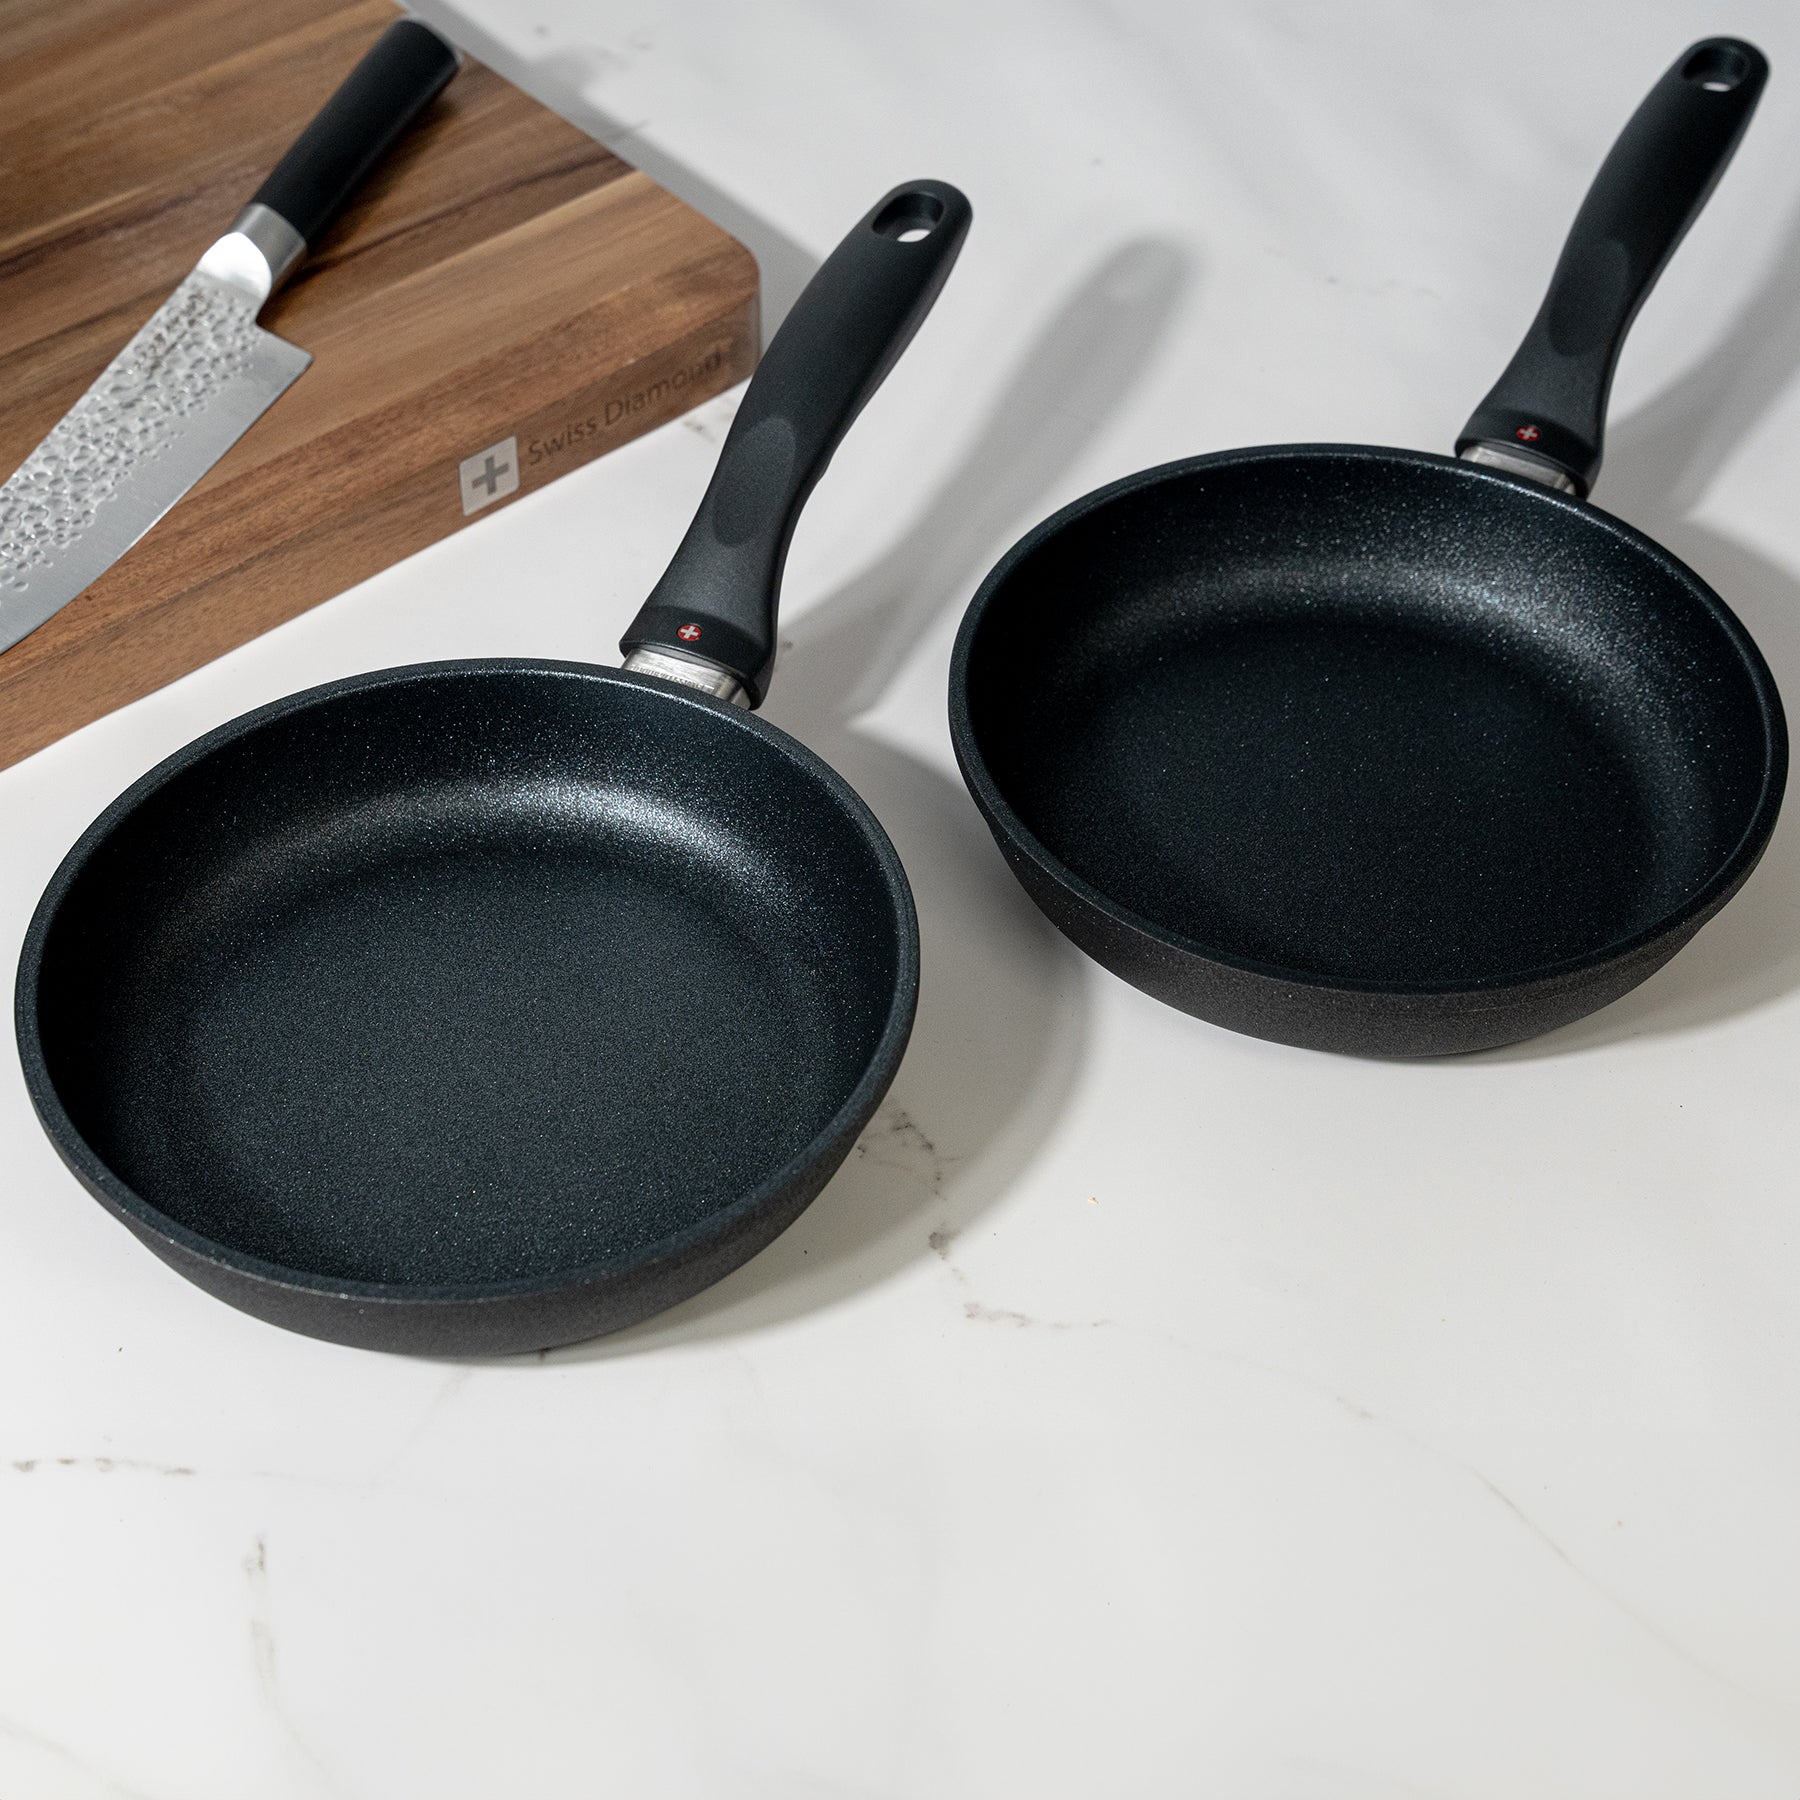 XD Nonstick 2-Piece 8" Fry Pan Set on kitchen counter beside a cutting board and knife